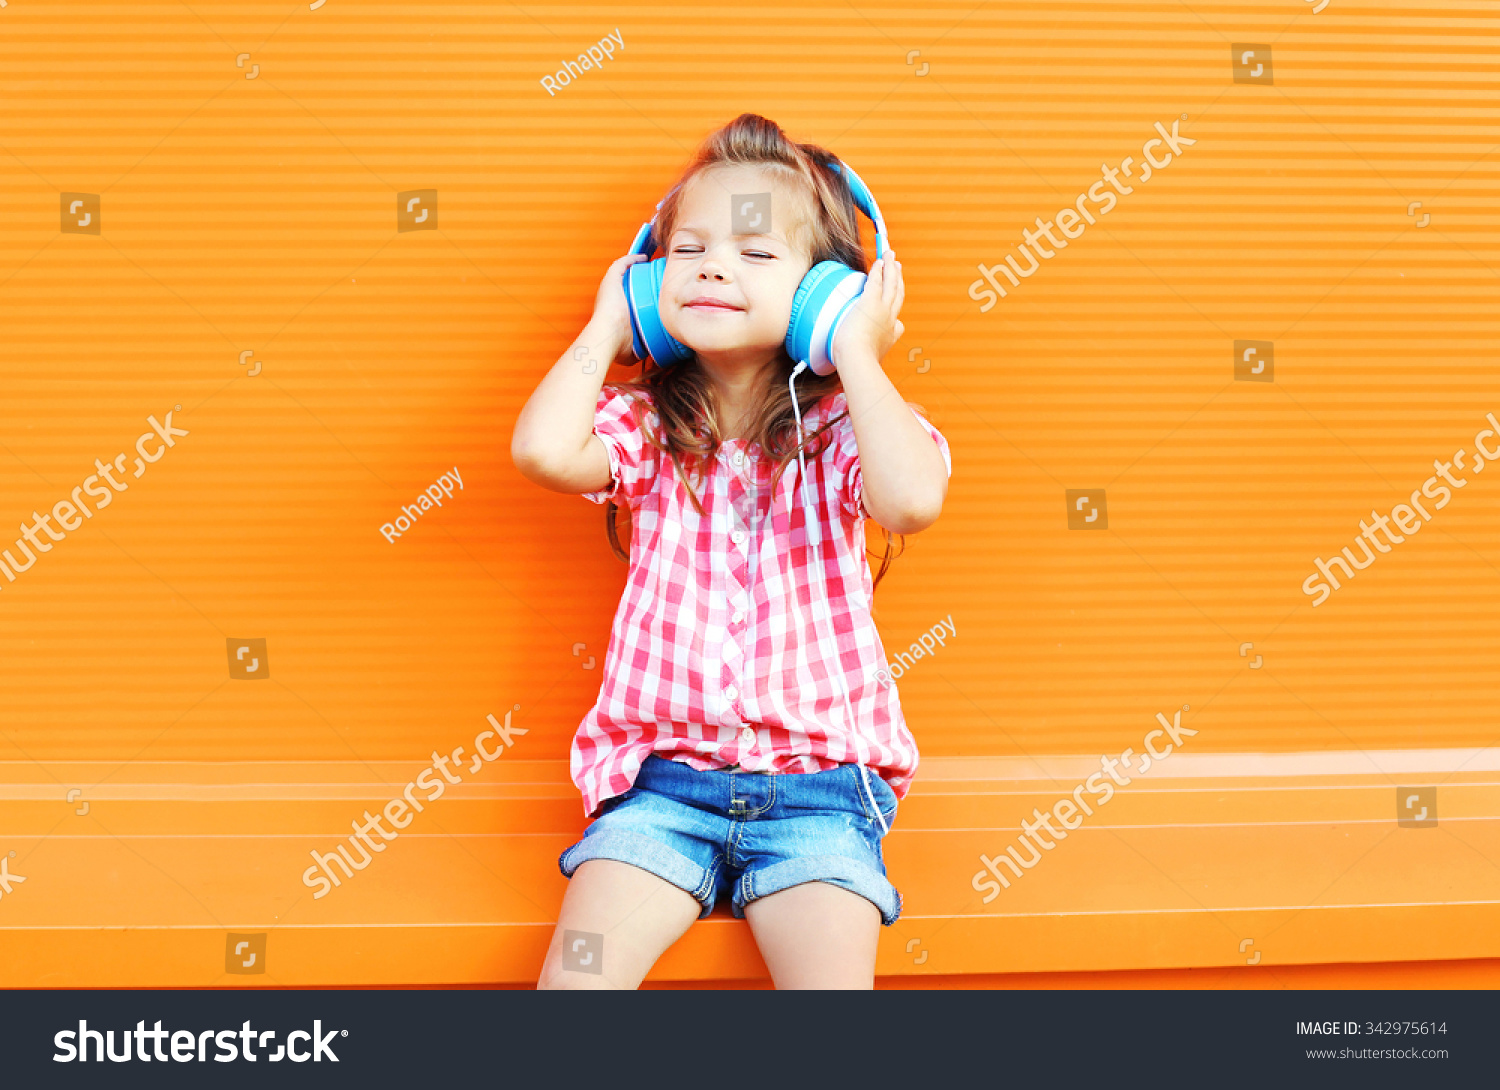 Happy smiling child enjoys listens to music in headphones over colorful orange background #342975614